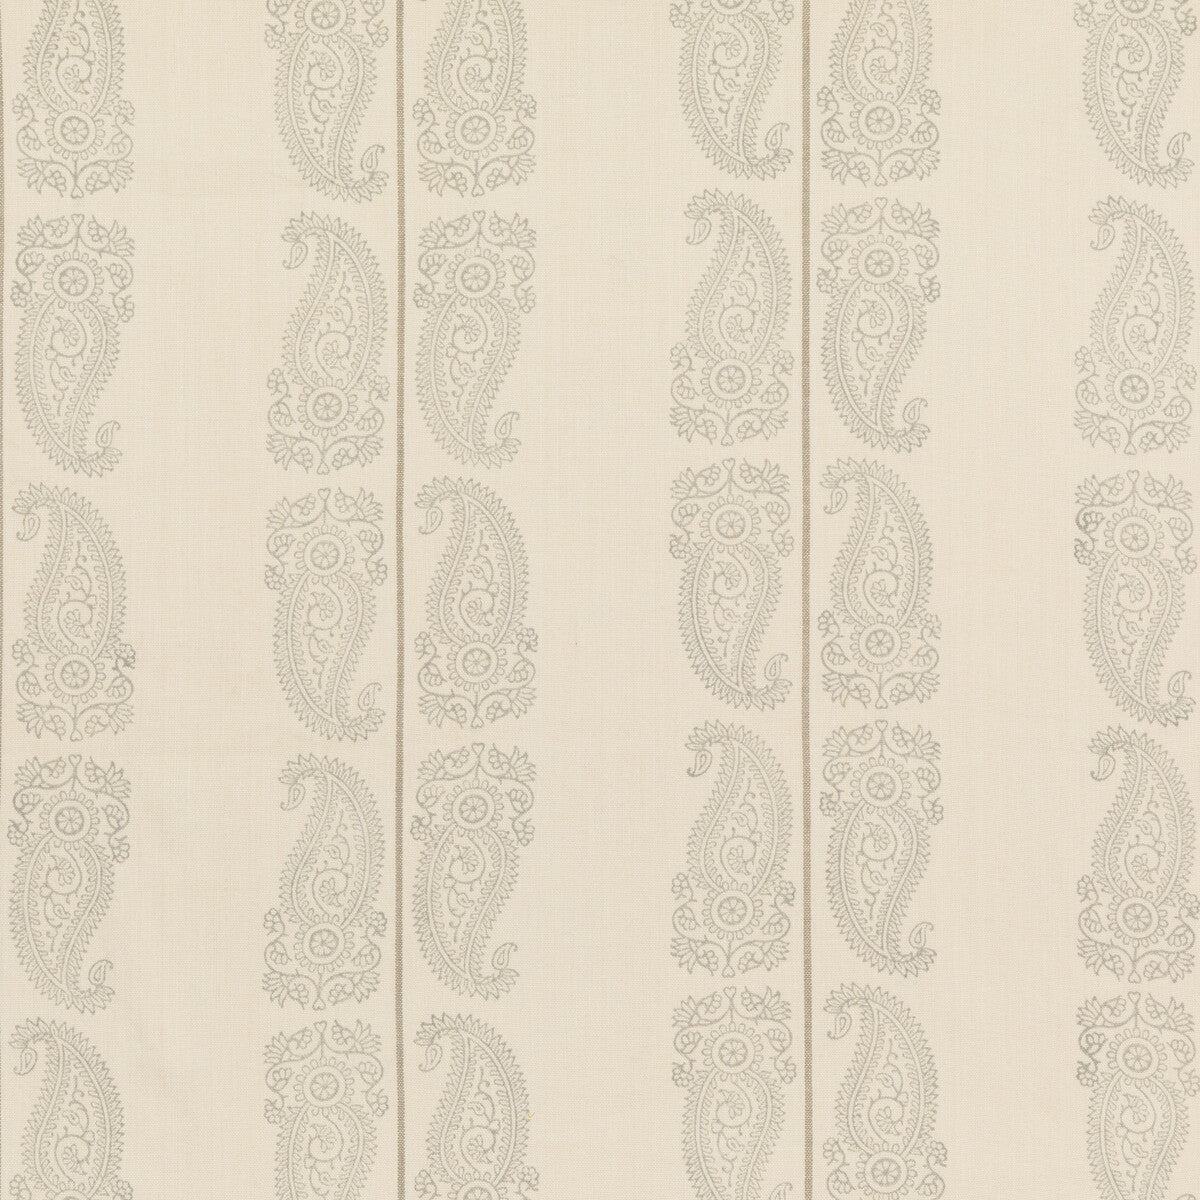 Cromer Paisley fabric in dove color - pattern BP10796.3.0 - by G P &amp; J Baker in the Artisan II collection